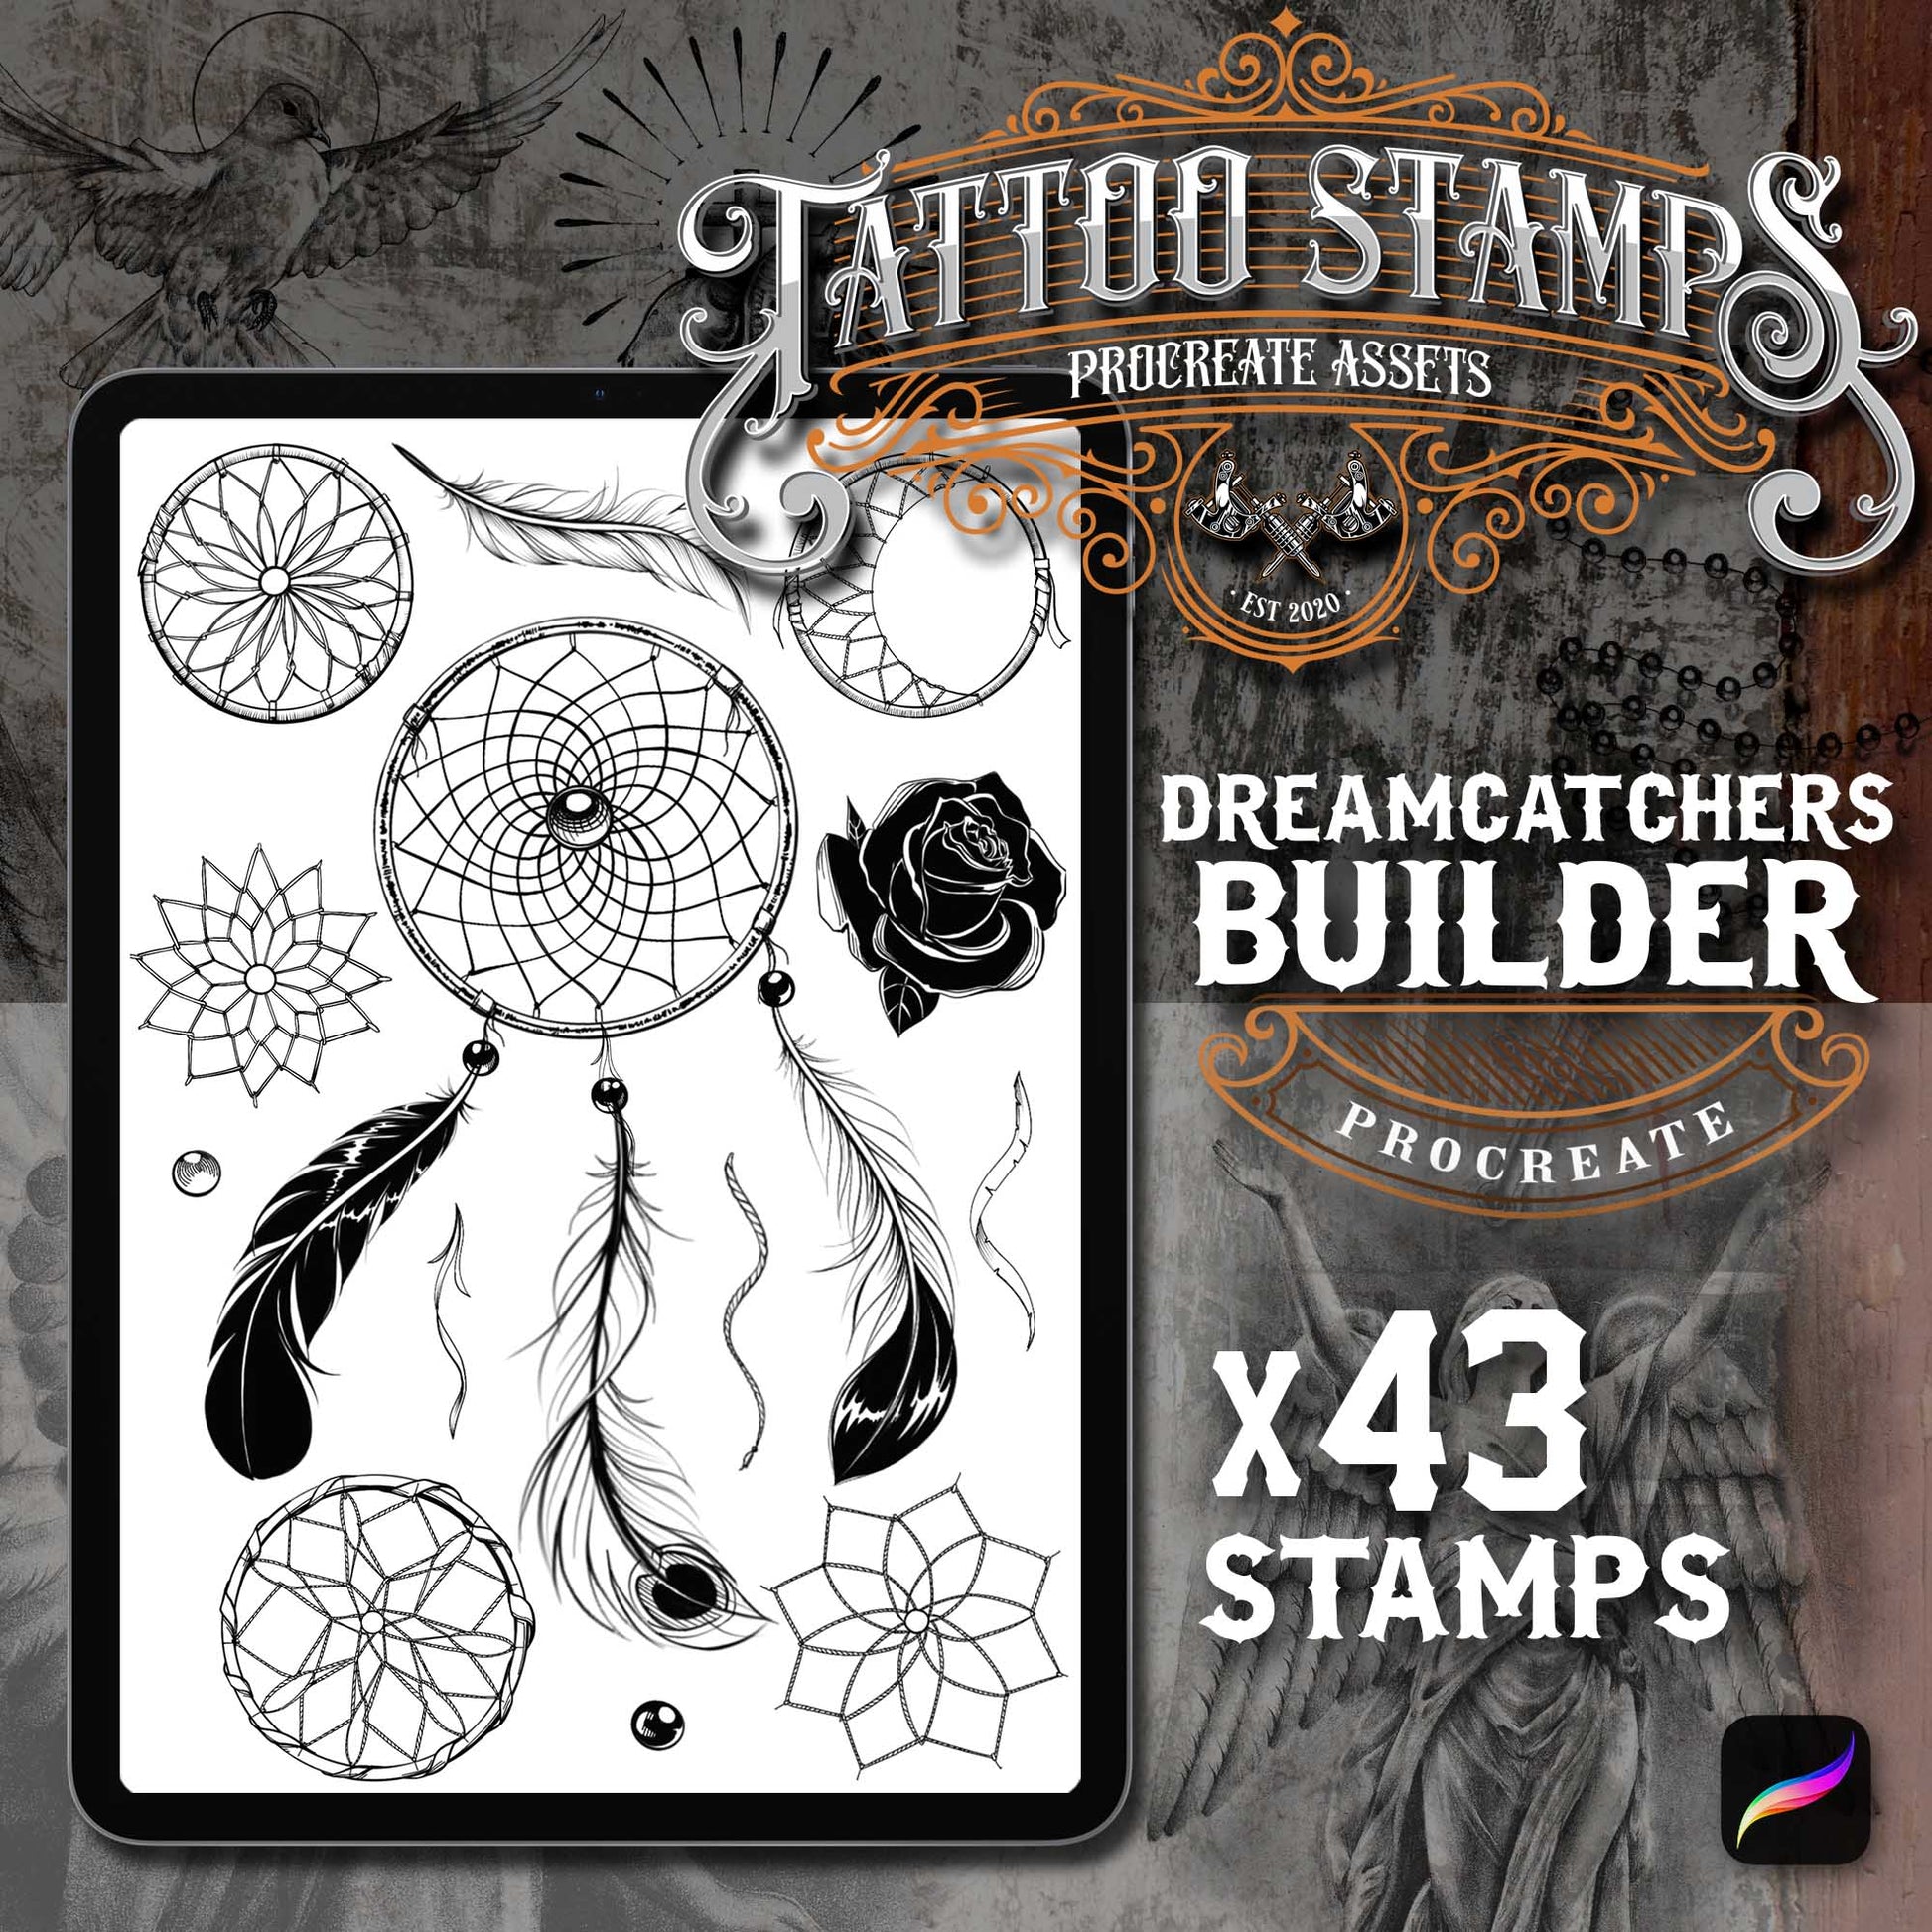 43 Realistic Dream Catcher Tattoo Procreate app for iPad & iPad pro  in the Master Pack by TattooStampsArt